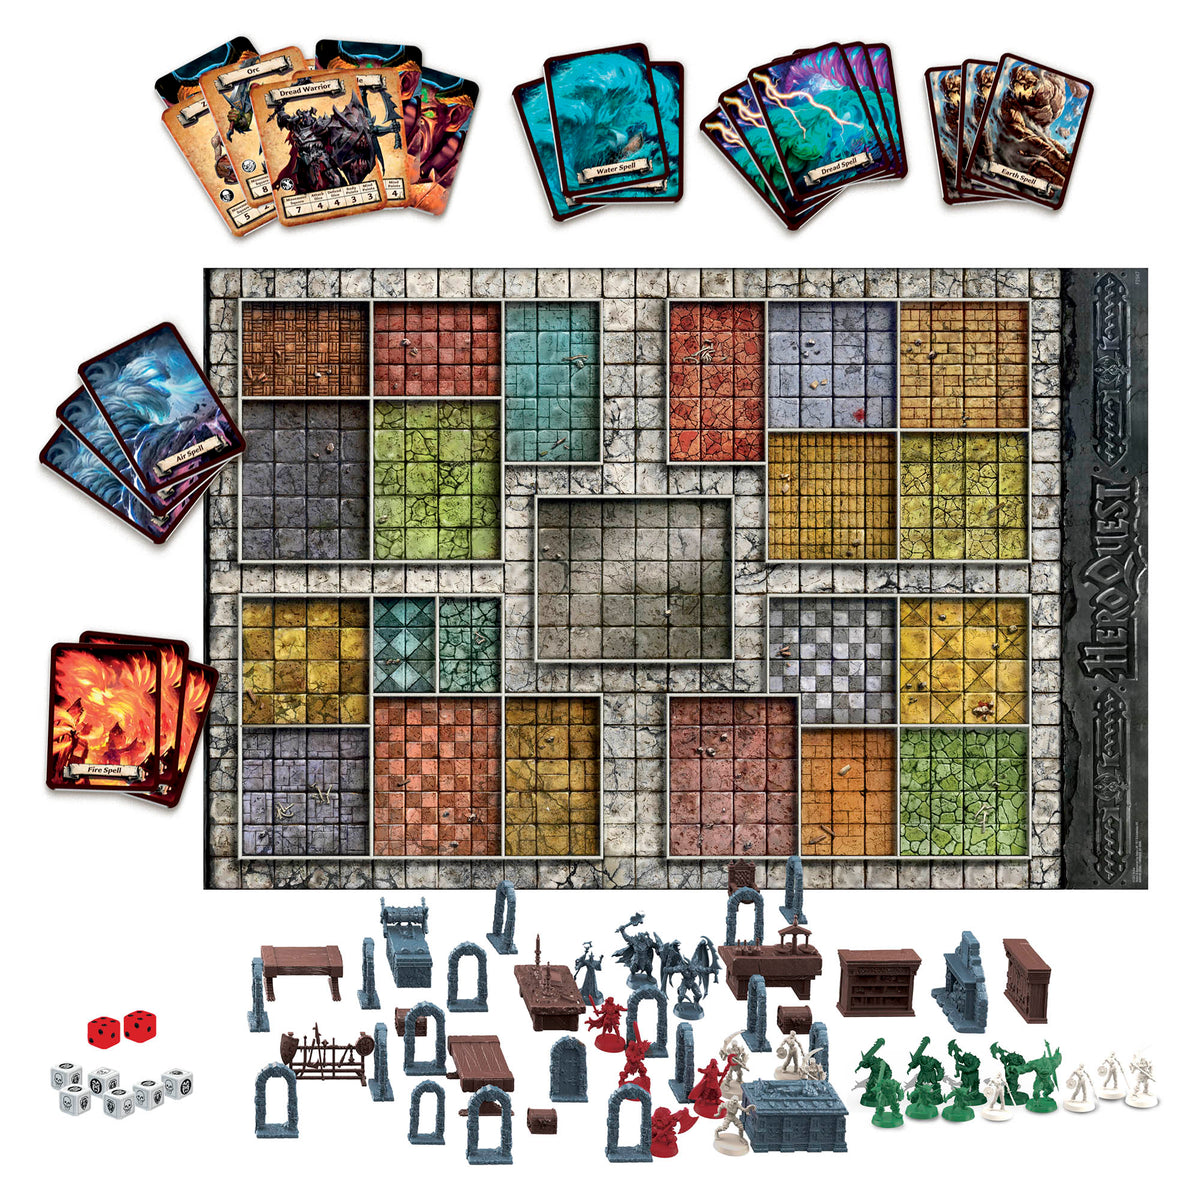 HeroQuest Extension L'Horreur des Glaces FR Avalon Hill Hasbro Gaming